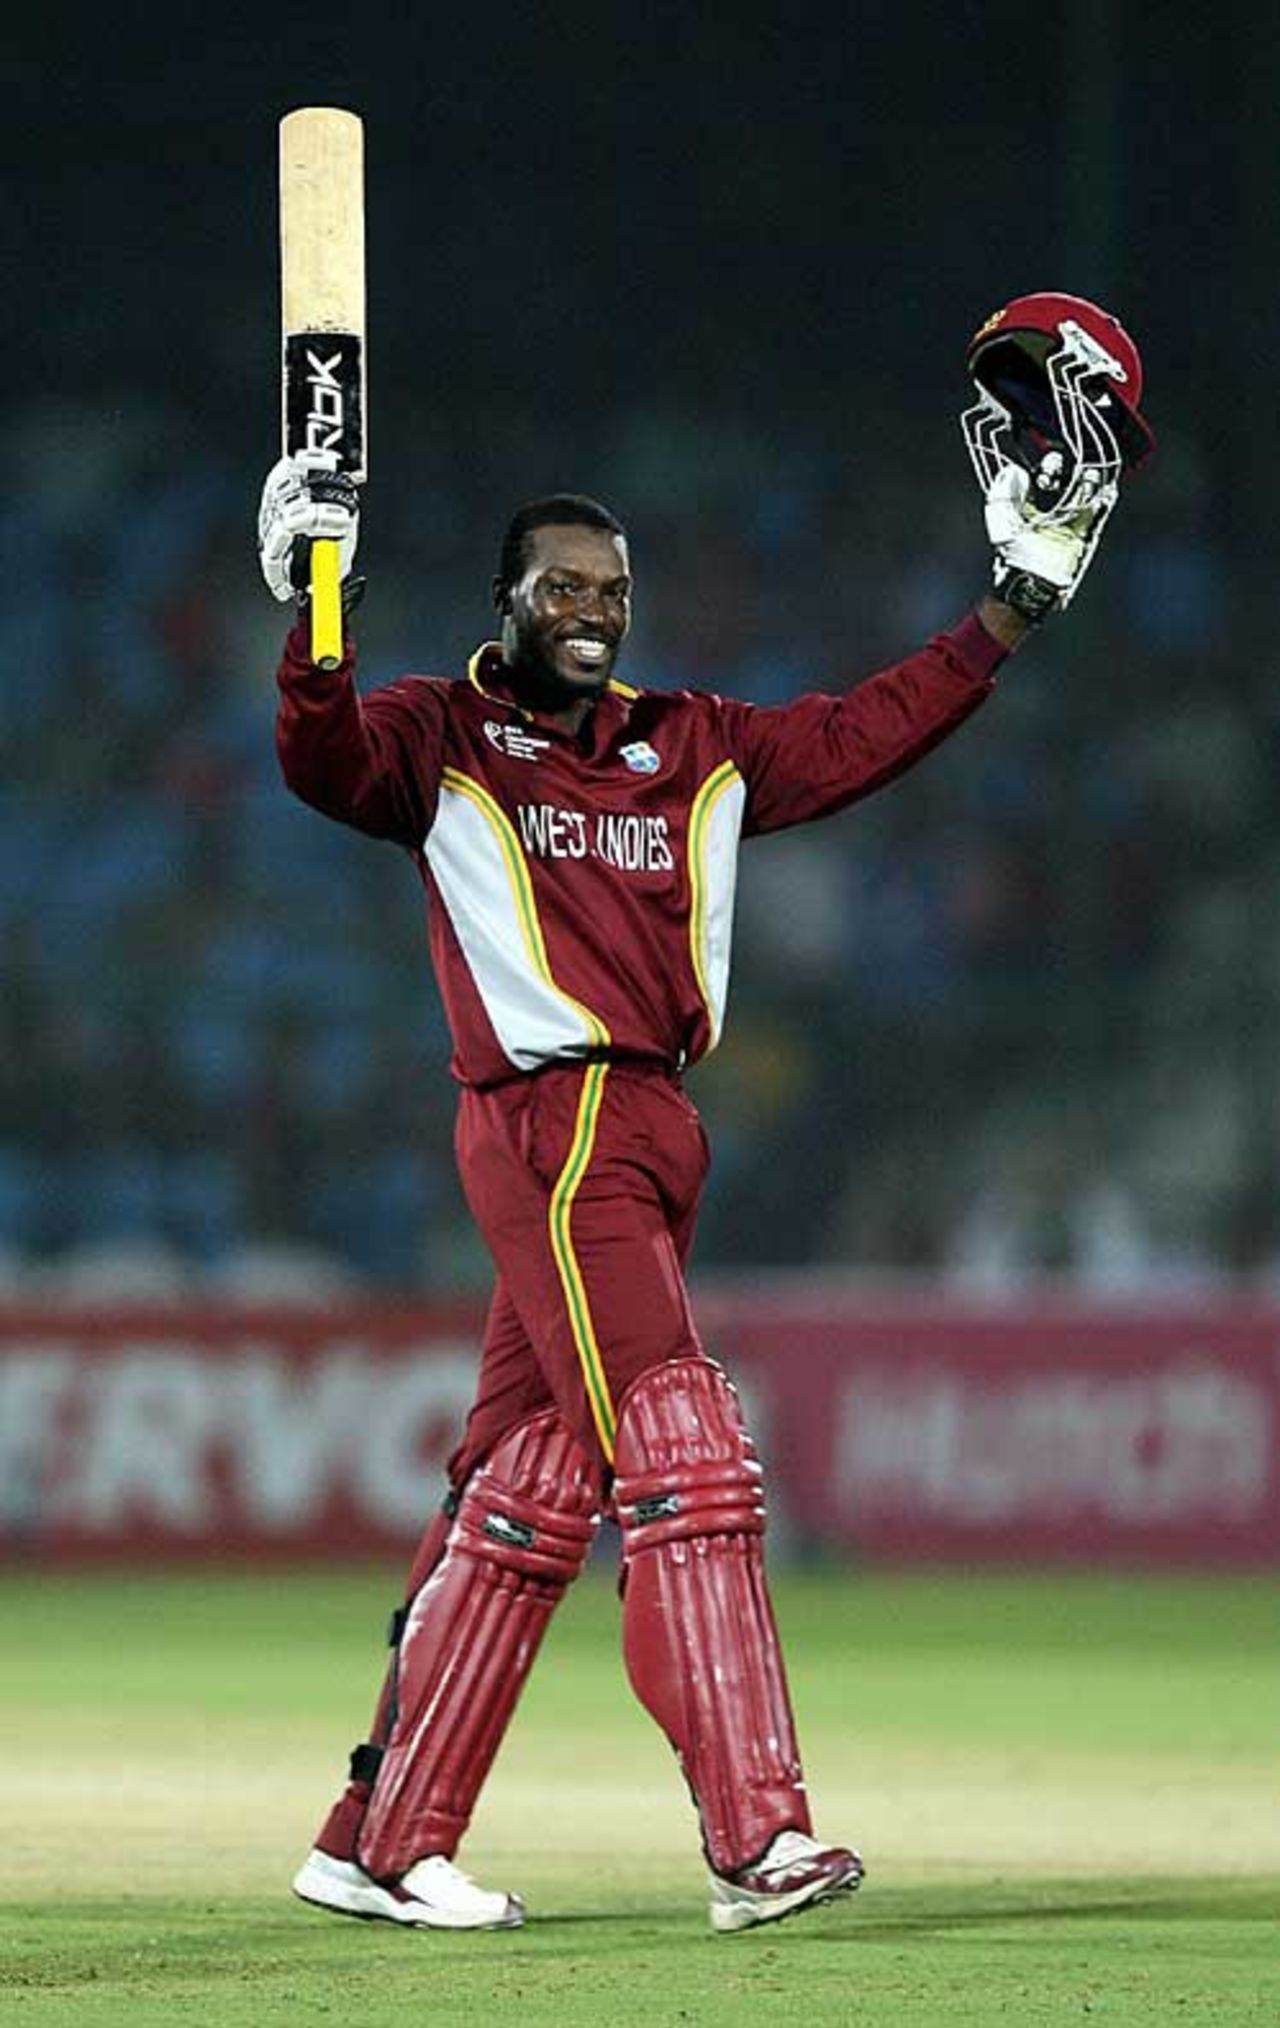 Chris Gayle raises his arms after reaching his ton against Bangladesh, West Indies v Bangladesh, Champions Trophy, Jaipur, October 11, 2006